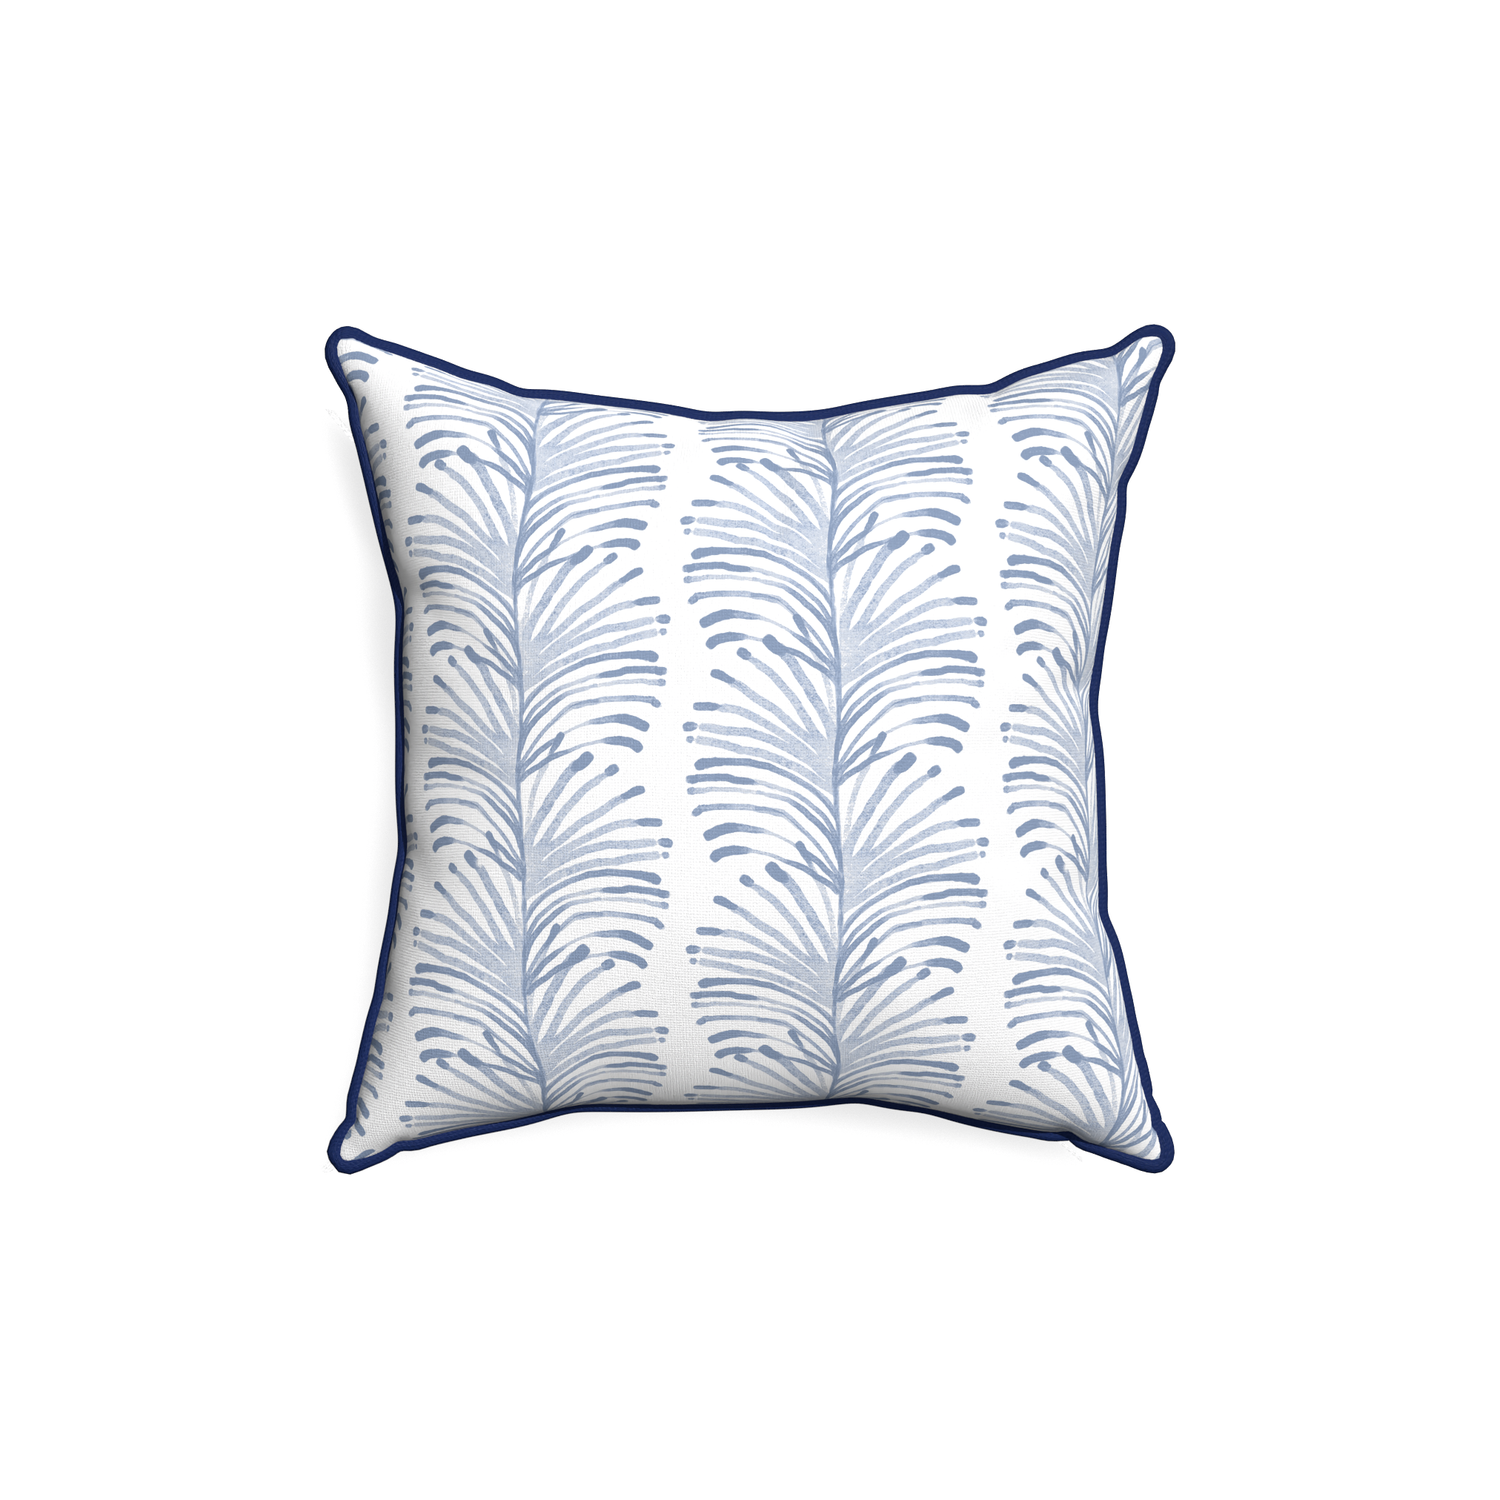 18-square emma sky custom pillow with midnight piping on white background